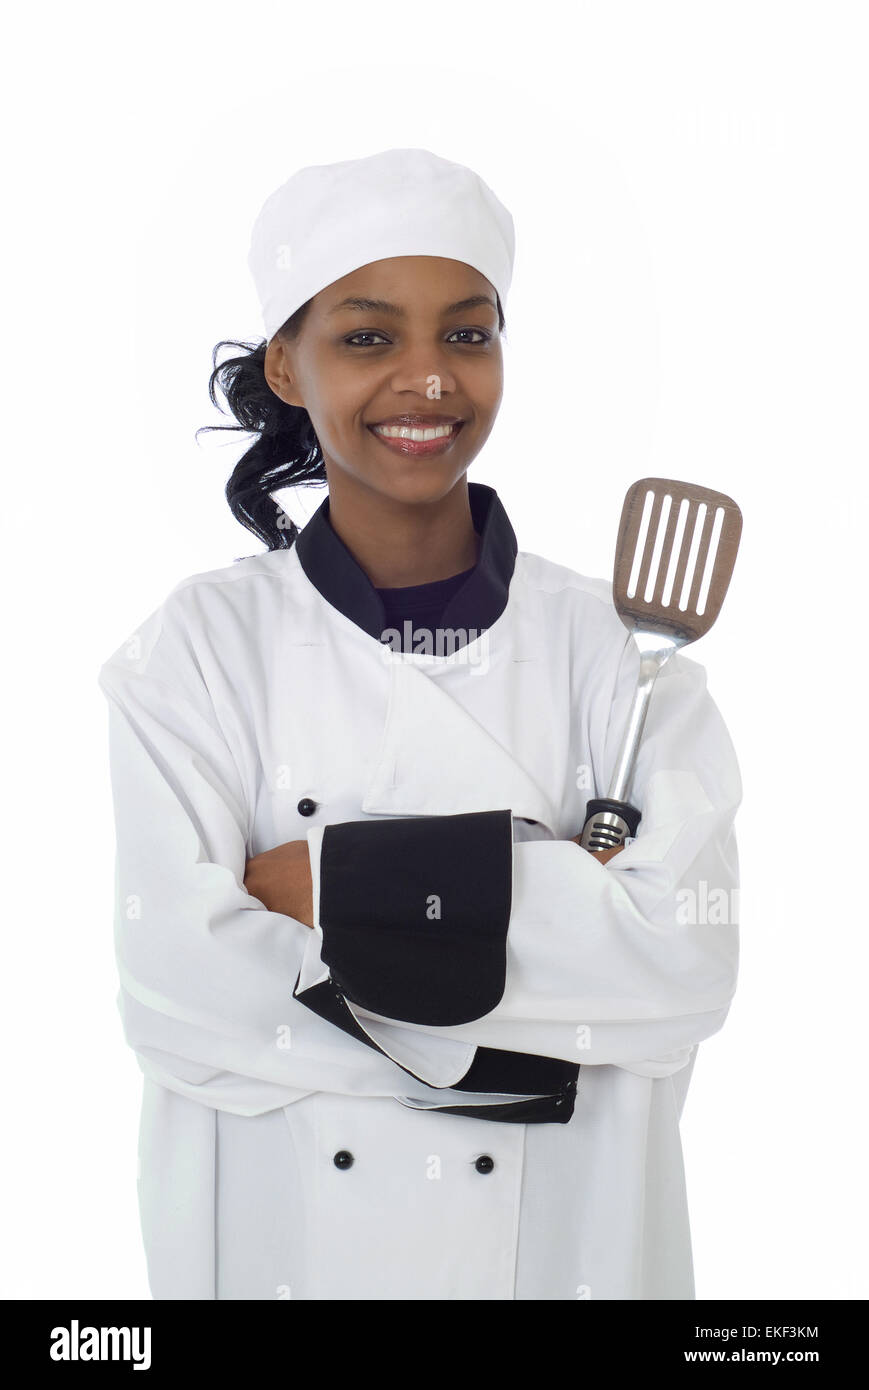 Chef and cooking utensil Stock Photo